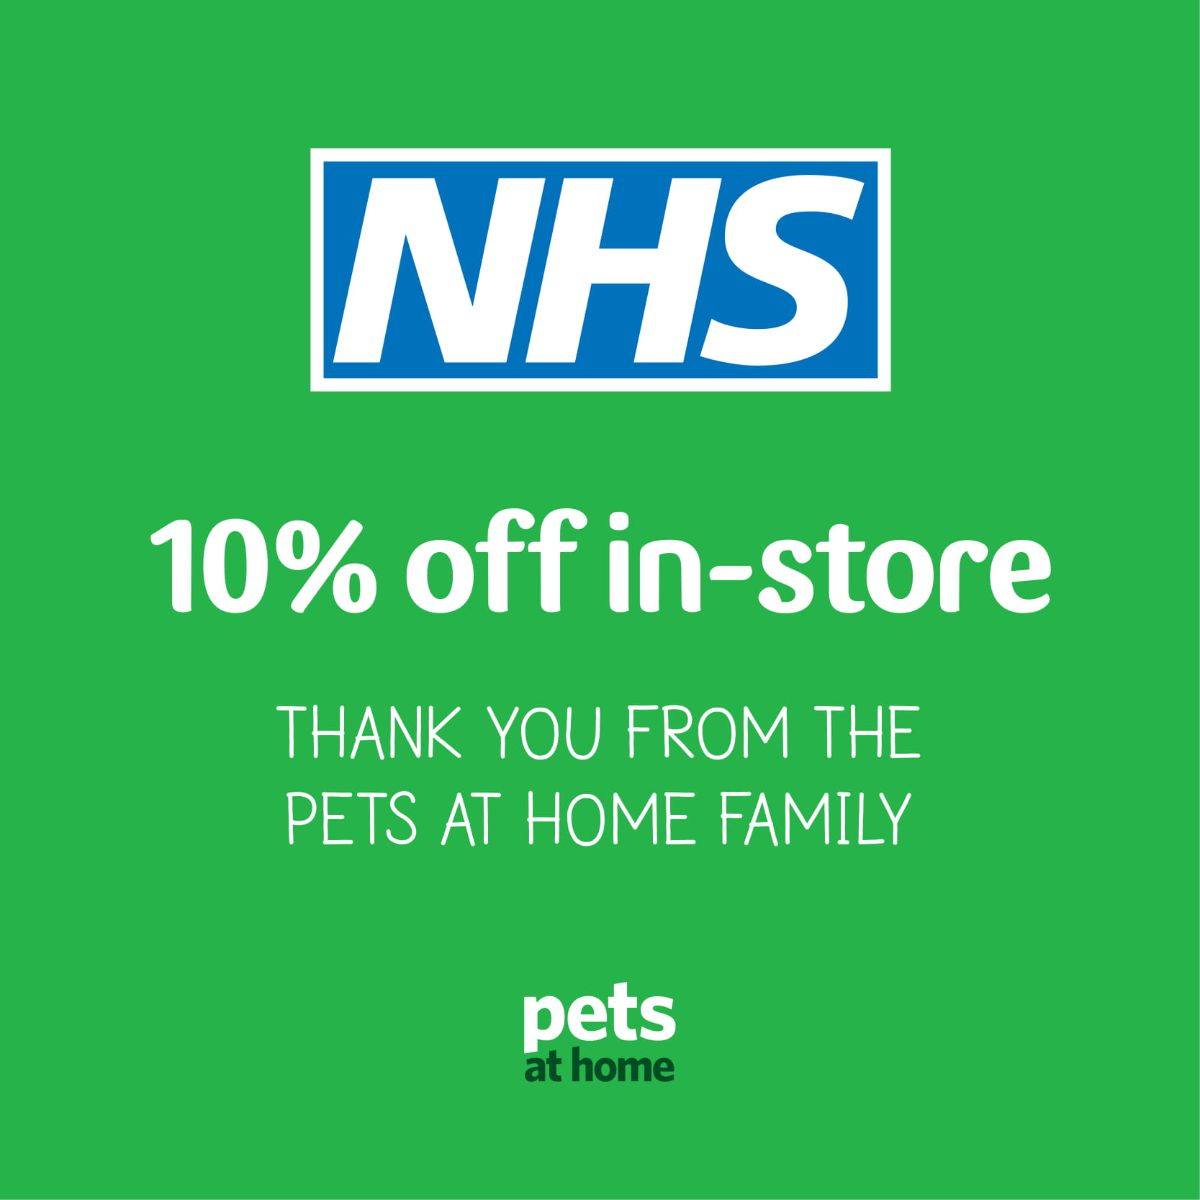 nhs clarks discount